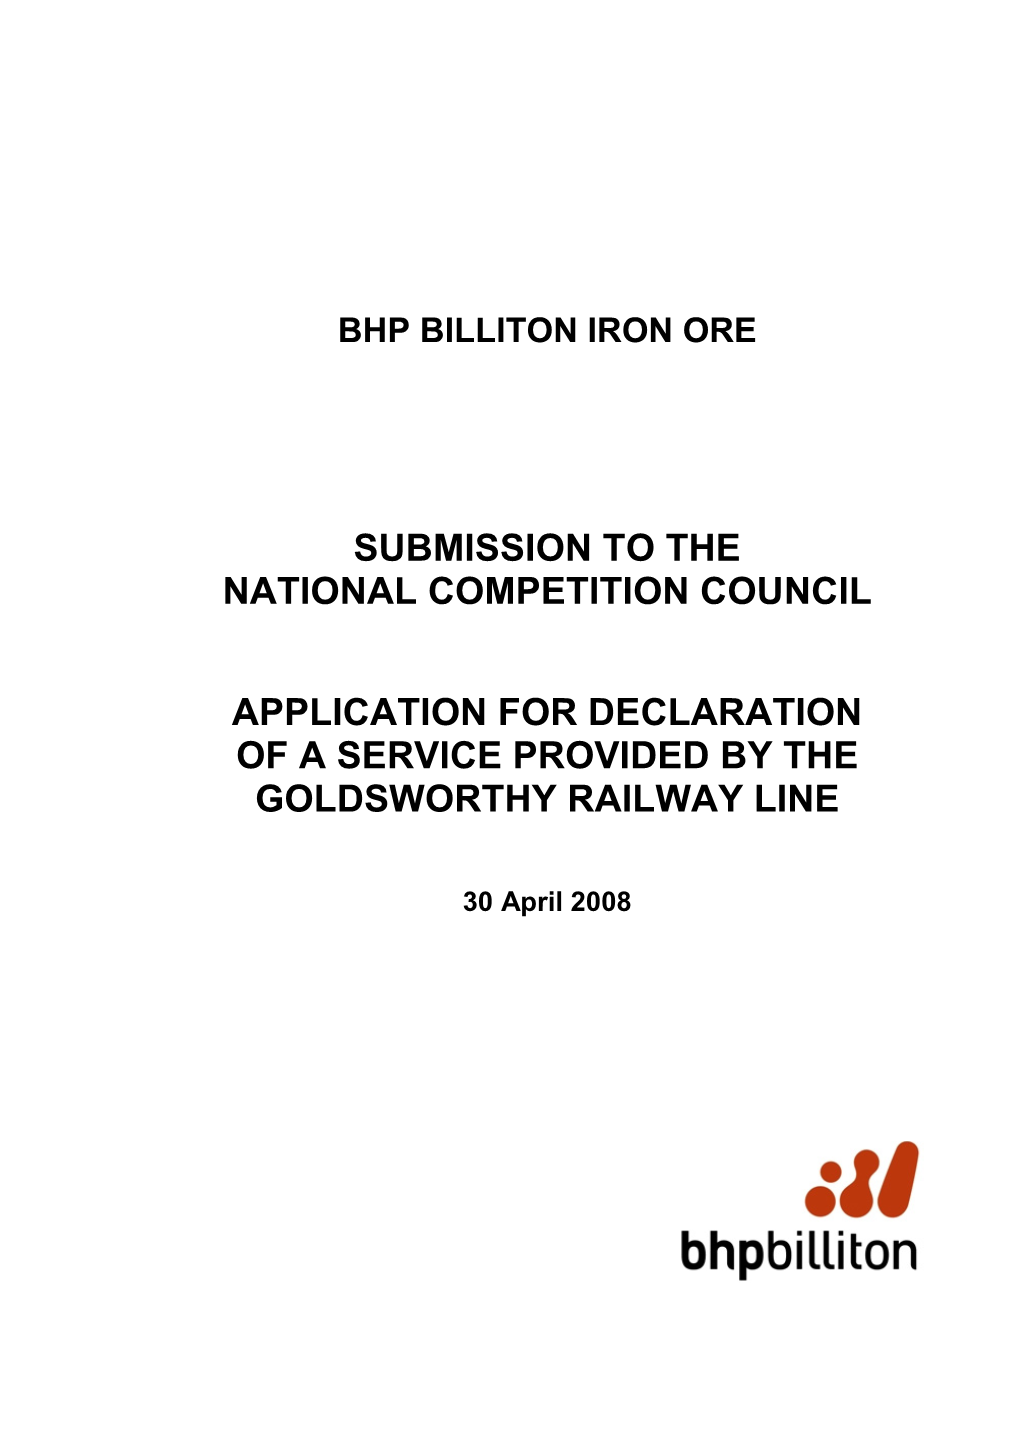 Application for Declaration of the Robe Railway, Submission by BHPBIO